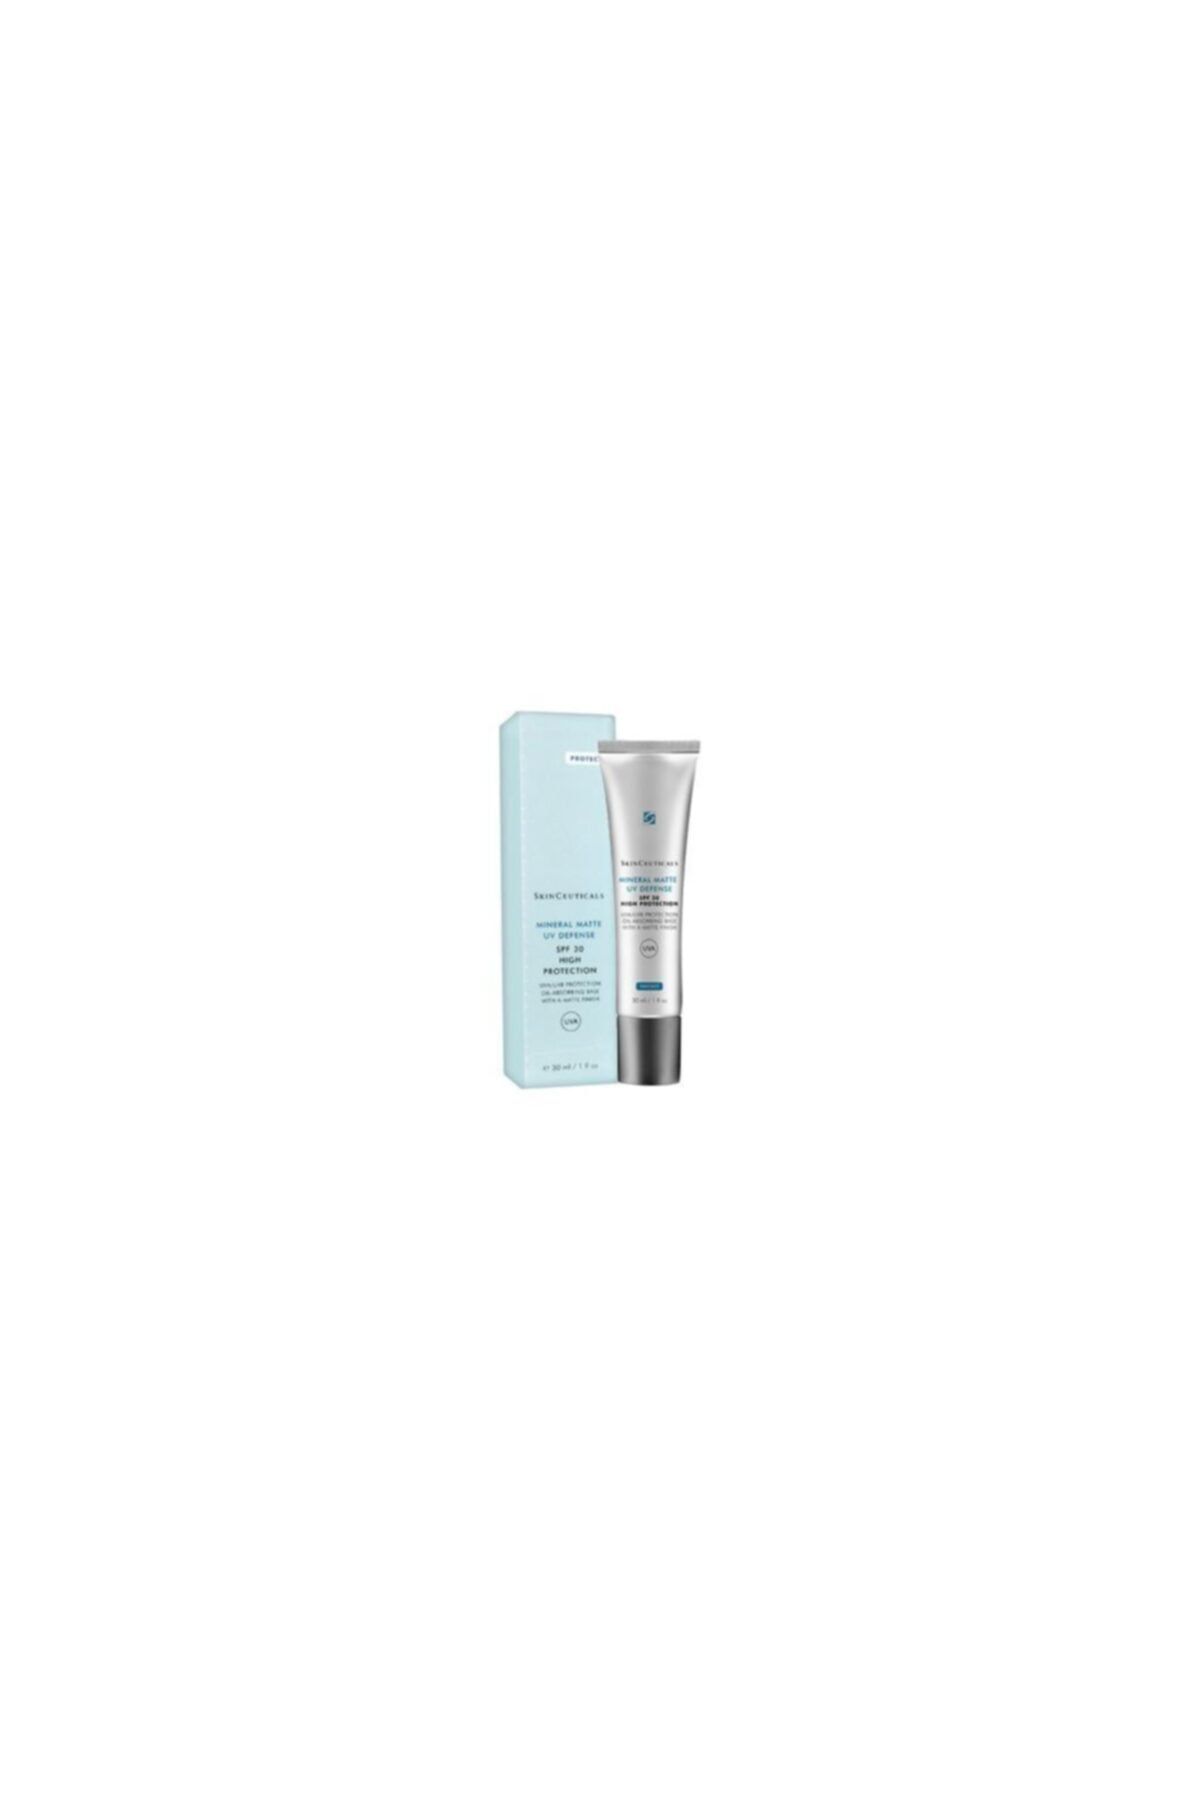 Skinceuticals Mineral Matte Uv Defense Spf30 High Protection 30ml